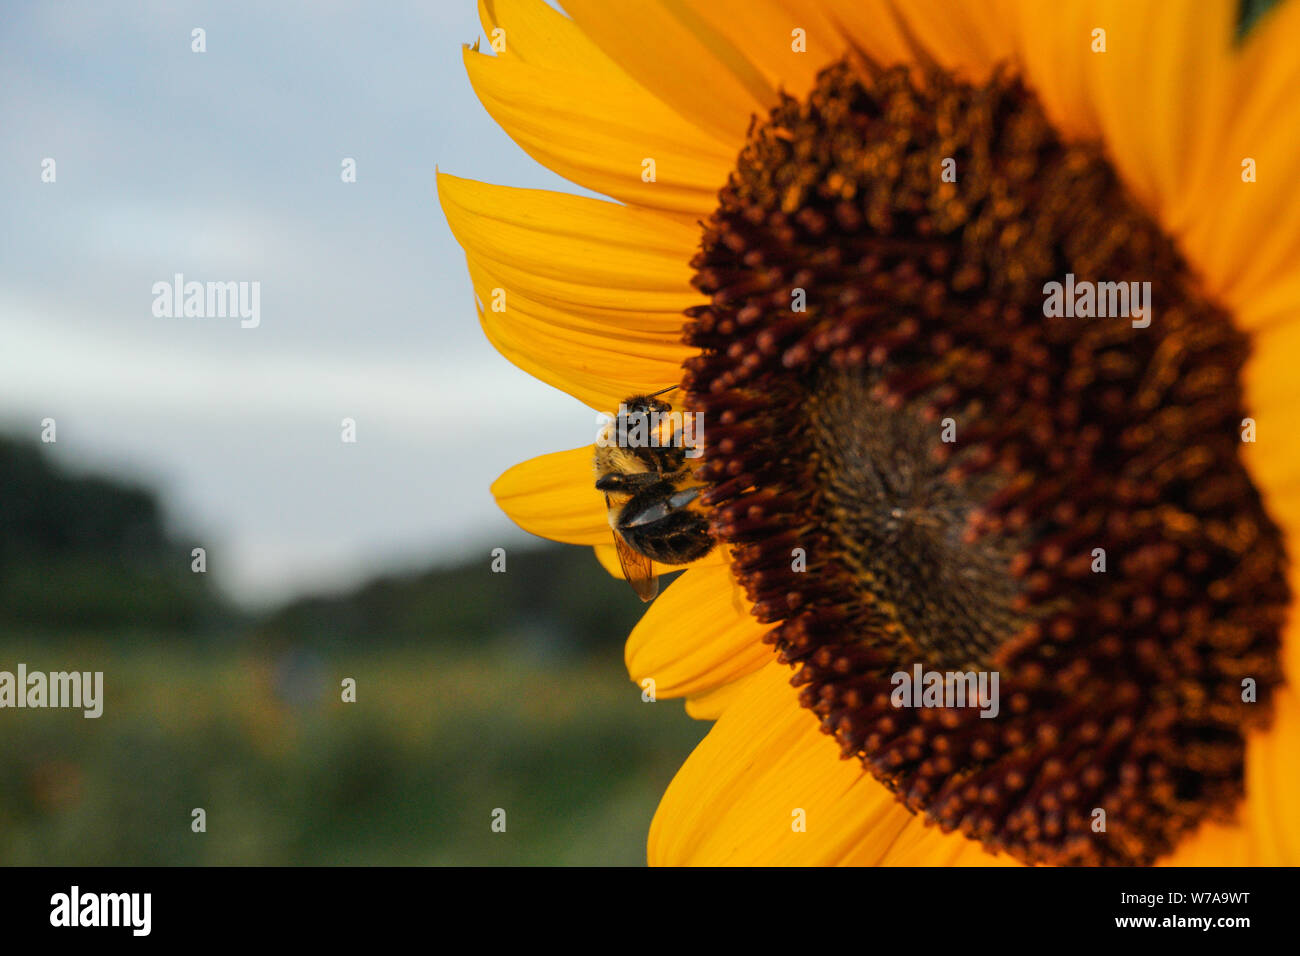 Close-up image of a bee pollinating a sunflower Stock Photo